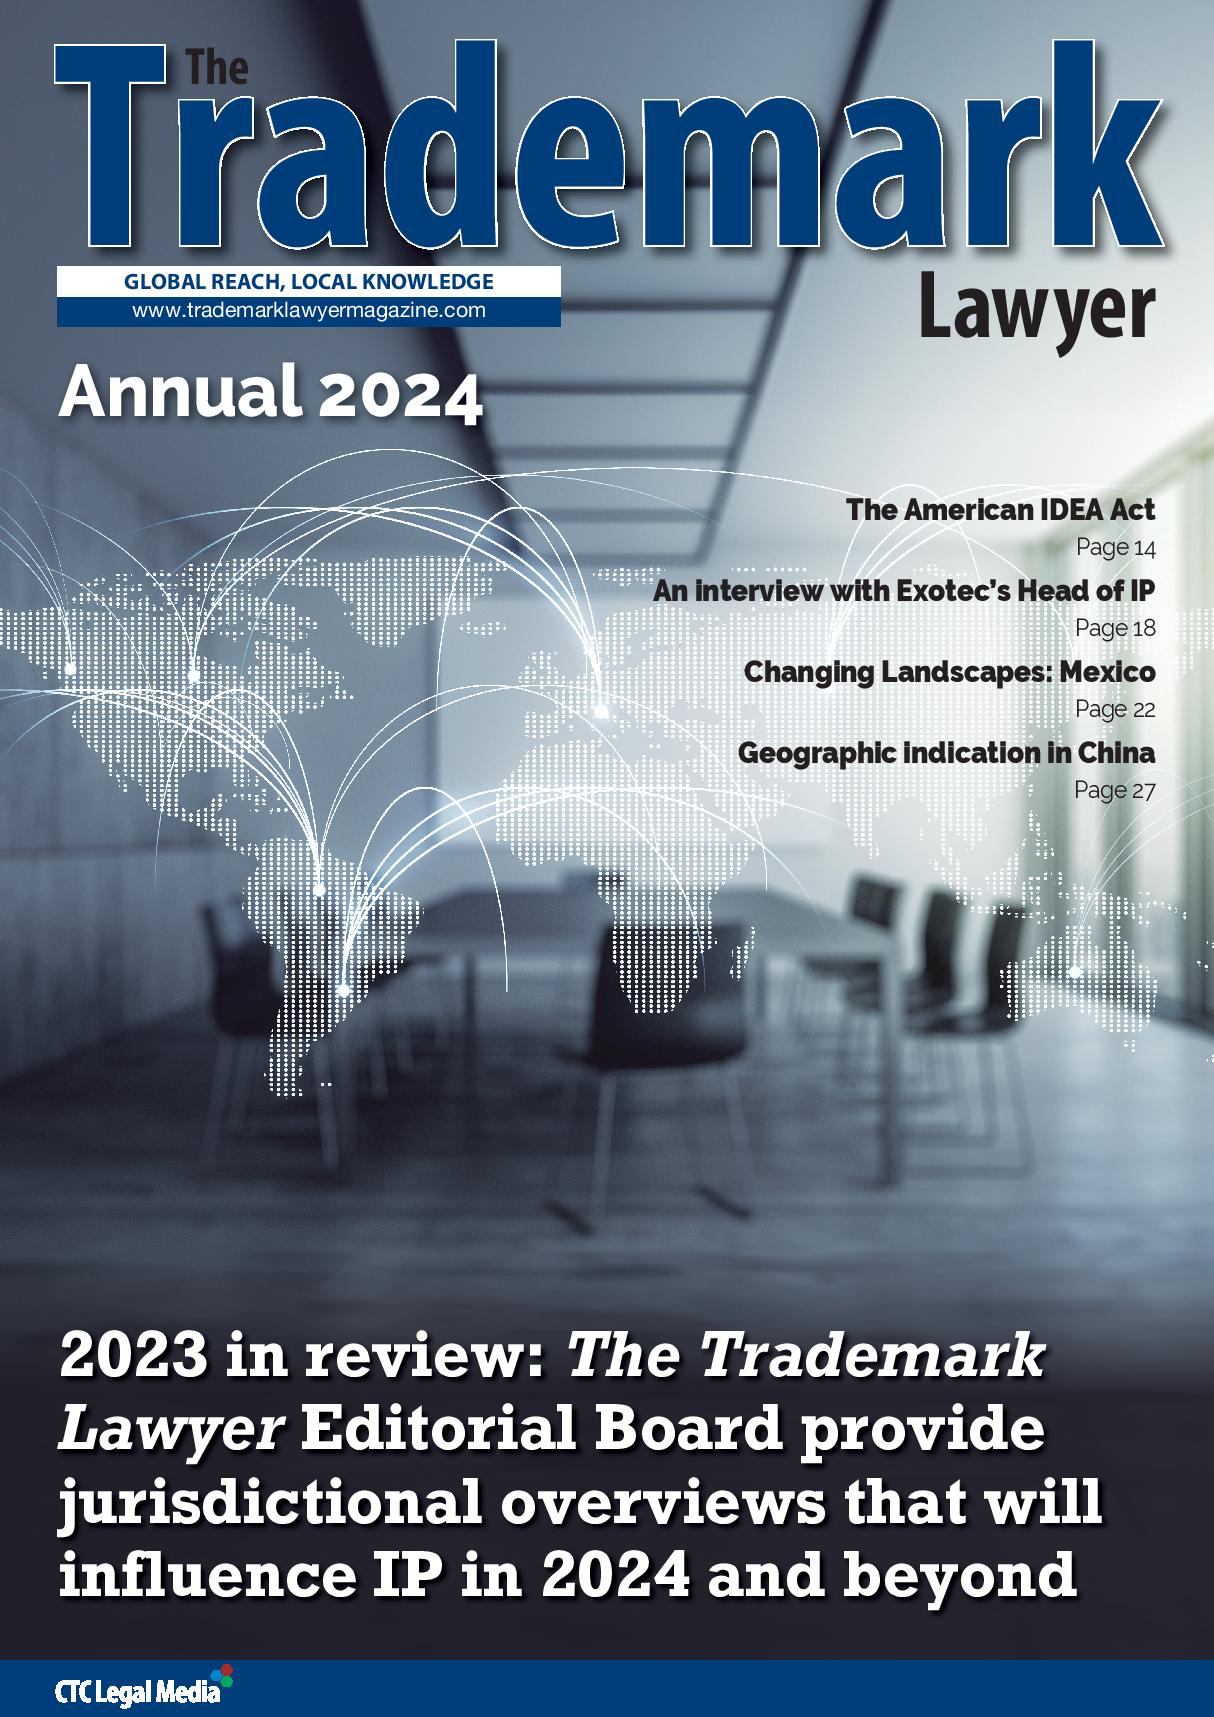 The Trademark Lawyer Issue 5, 2023